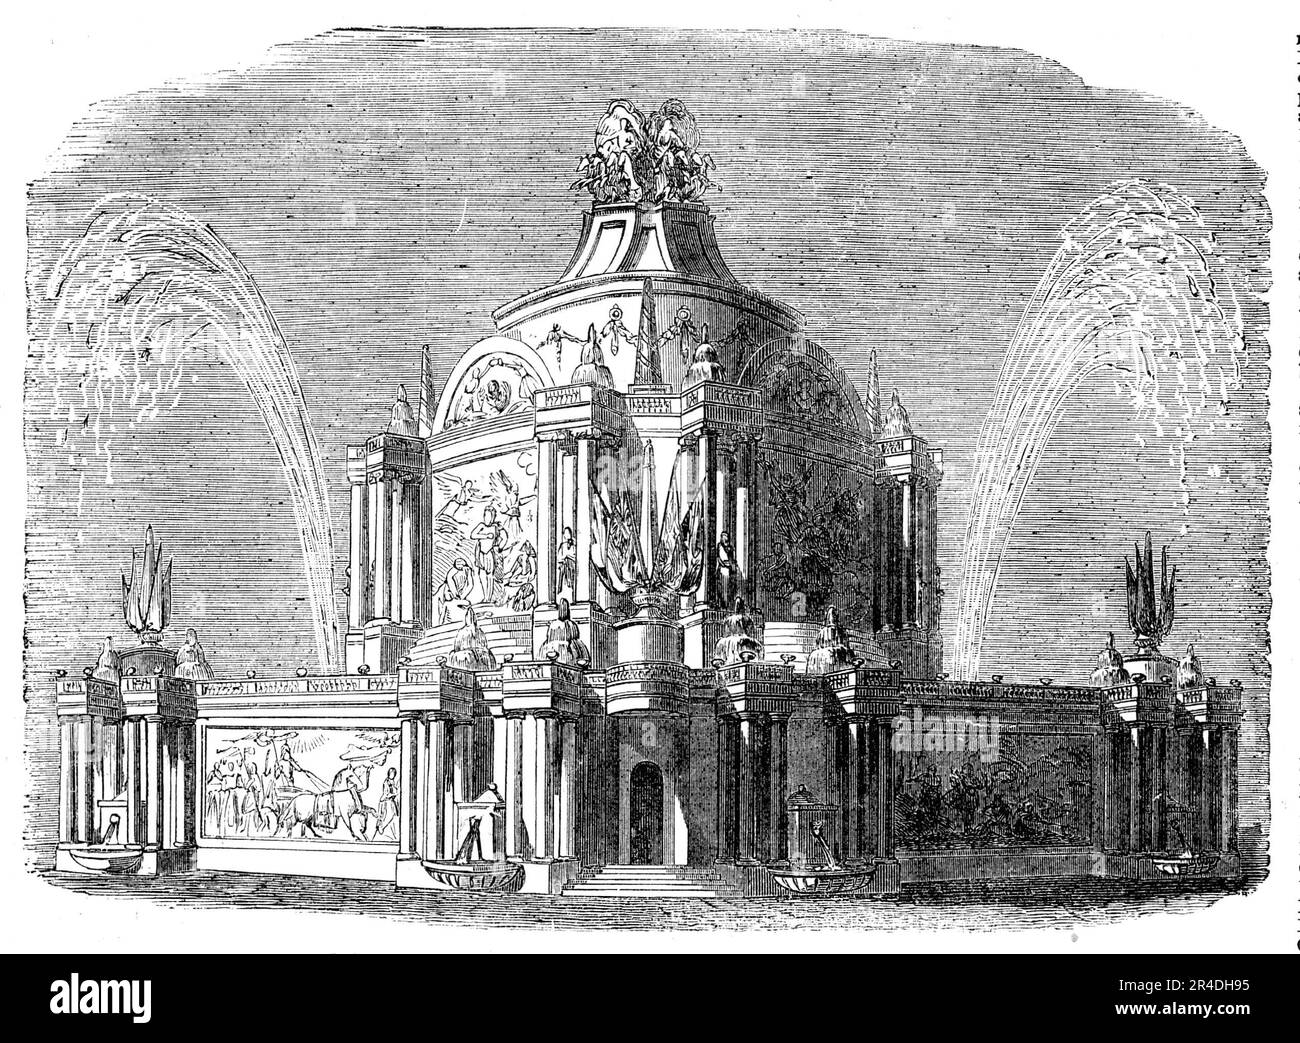 Peace Commemoration, 1814 - Temple of Concord in the Green-Park, [London], 1856. Commemoration of the Treaty of Aix-la-Chapelle, (18 October 1748). The treaty was negotiated largely by Britain and France, with the other powers following their lead, and marked the ending the War of the Austrian Succession (1740-48). From &quot;Illustrated London News&quot;, 1856. Stock Photo